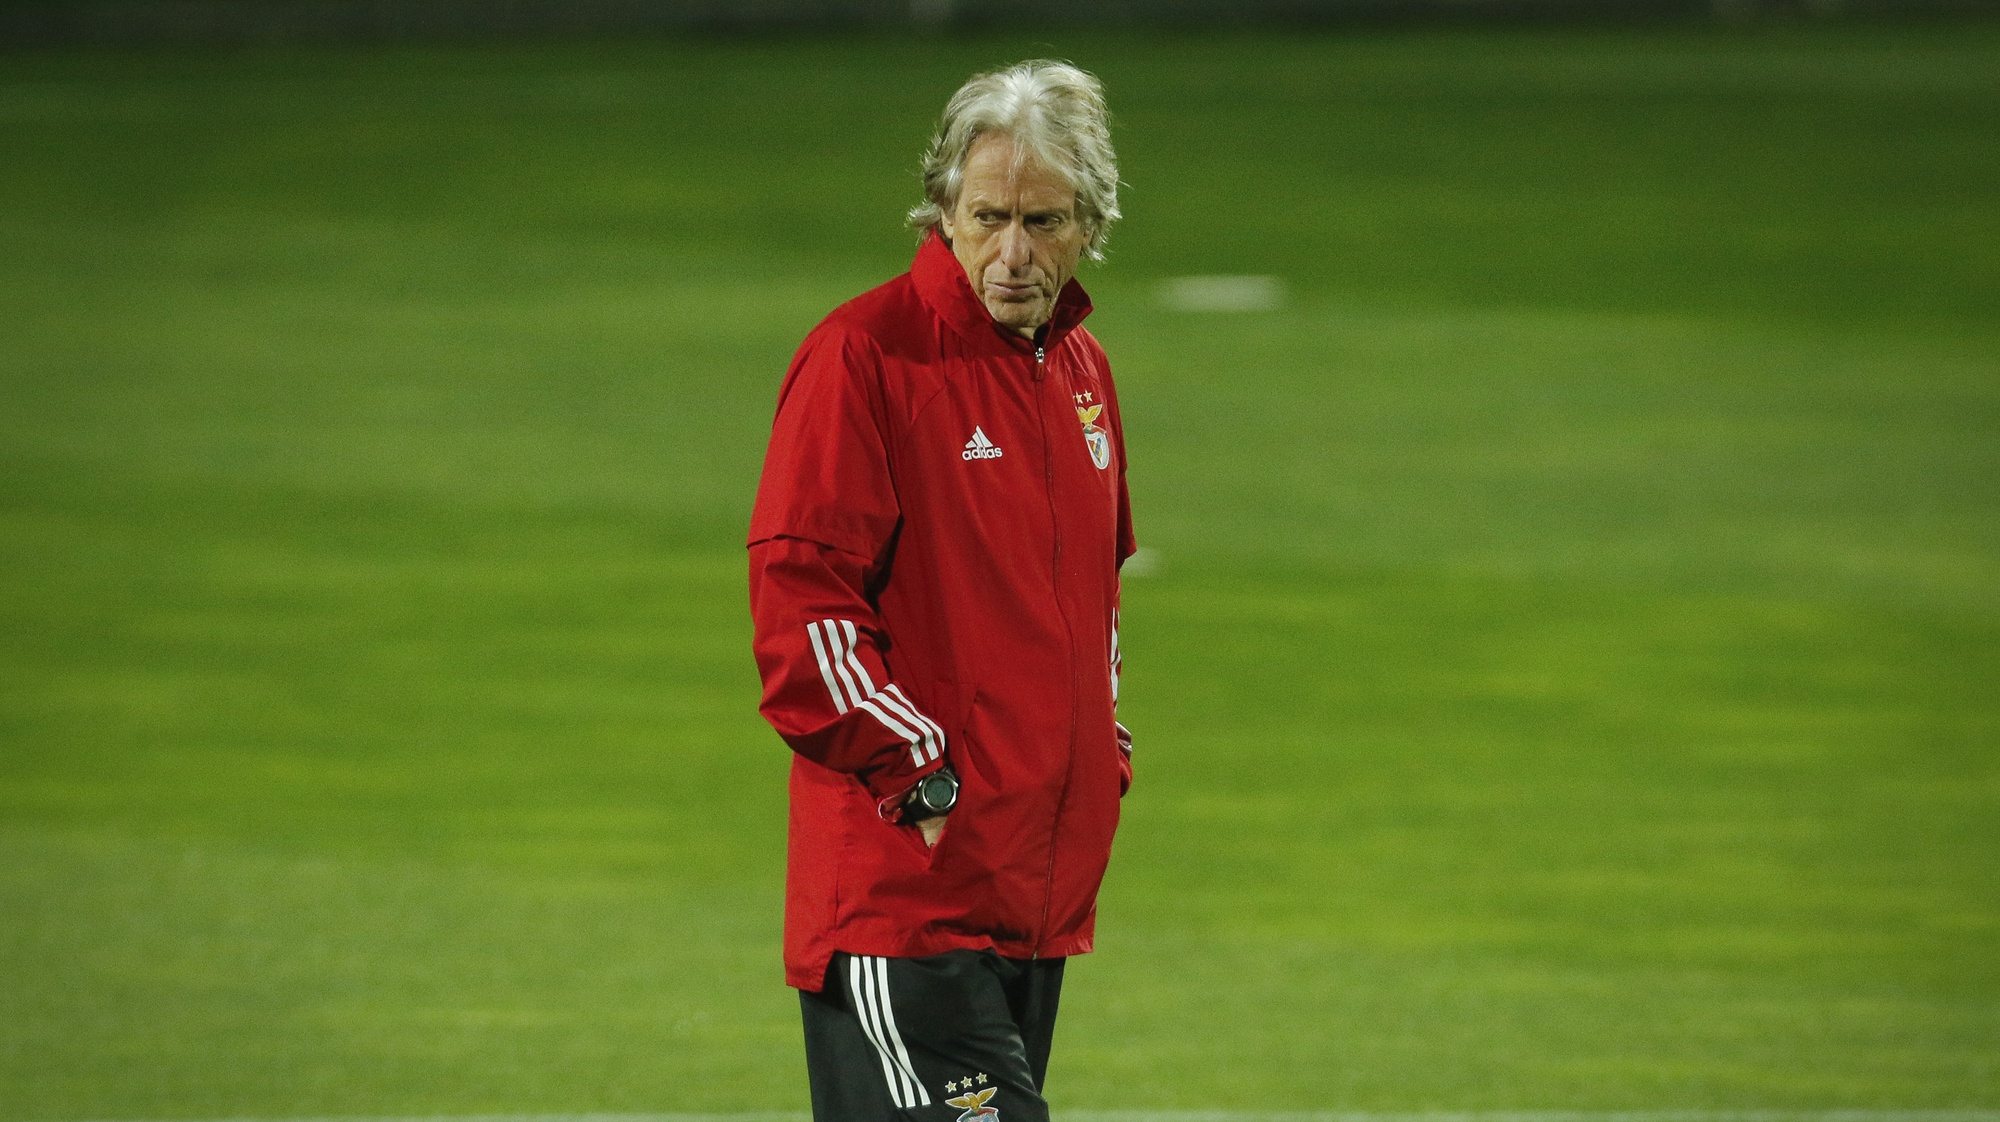 Benfica headcoach Jorge Jesus during a training session in Seixal, near Lisbon, Portugal, 4th October 2020. Benfica will face Rangers in their UEFA Matchday 3 of the Europa League Group D soccer match at Luz Stadium on 5th October. RUI MINDERICO/LUSA